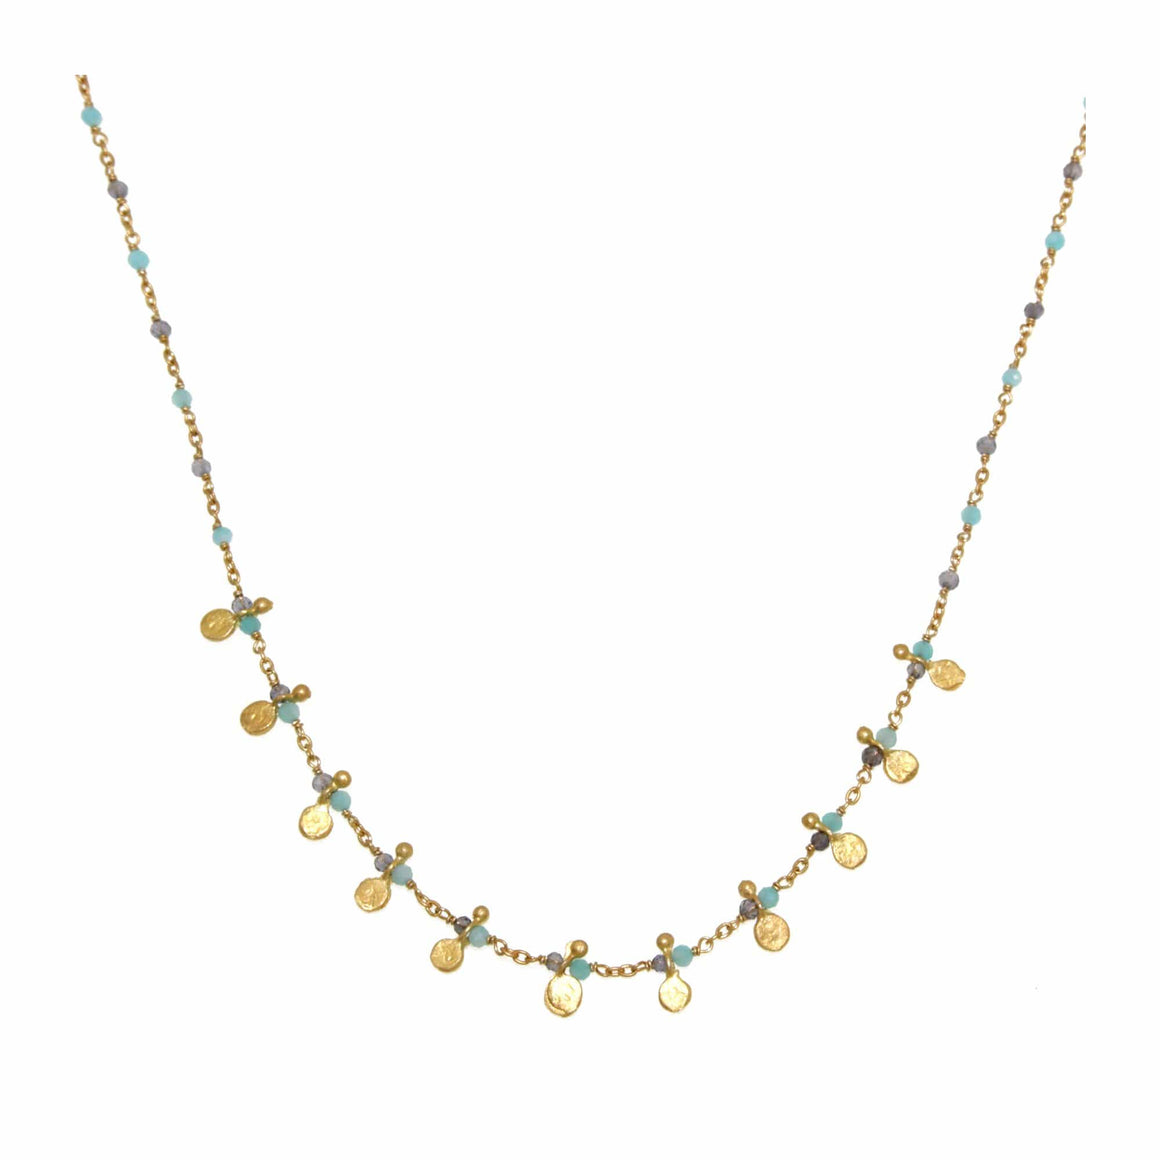 Helen Station Necklace in Aqua Chalcedony